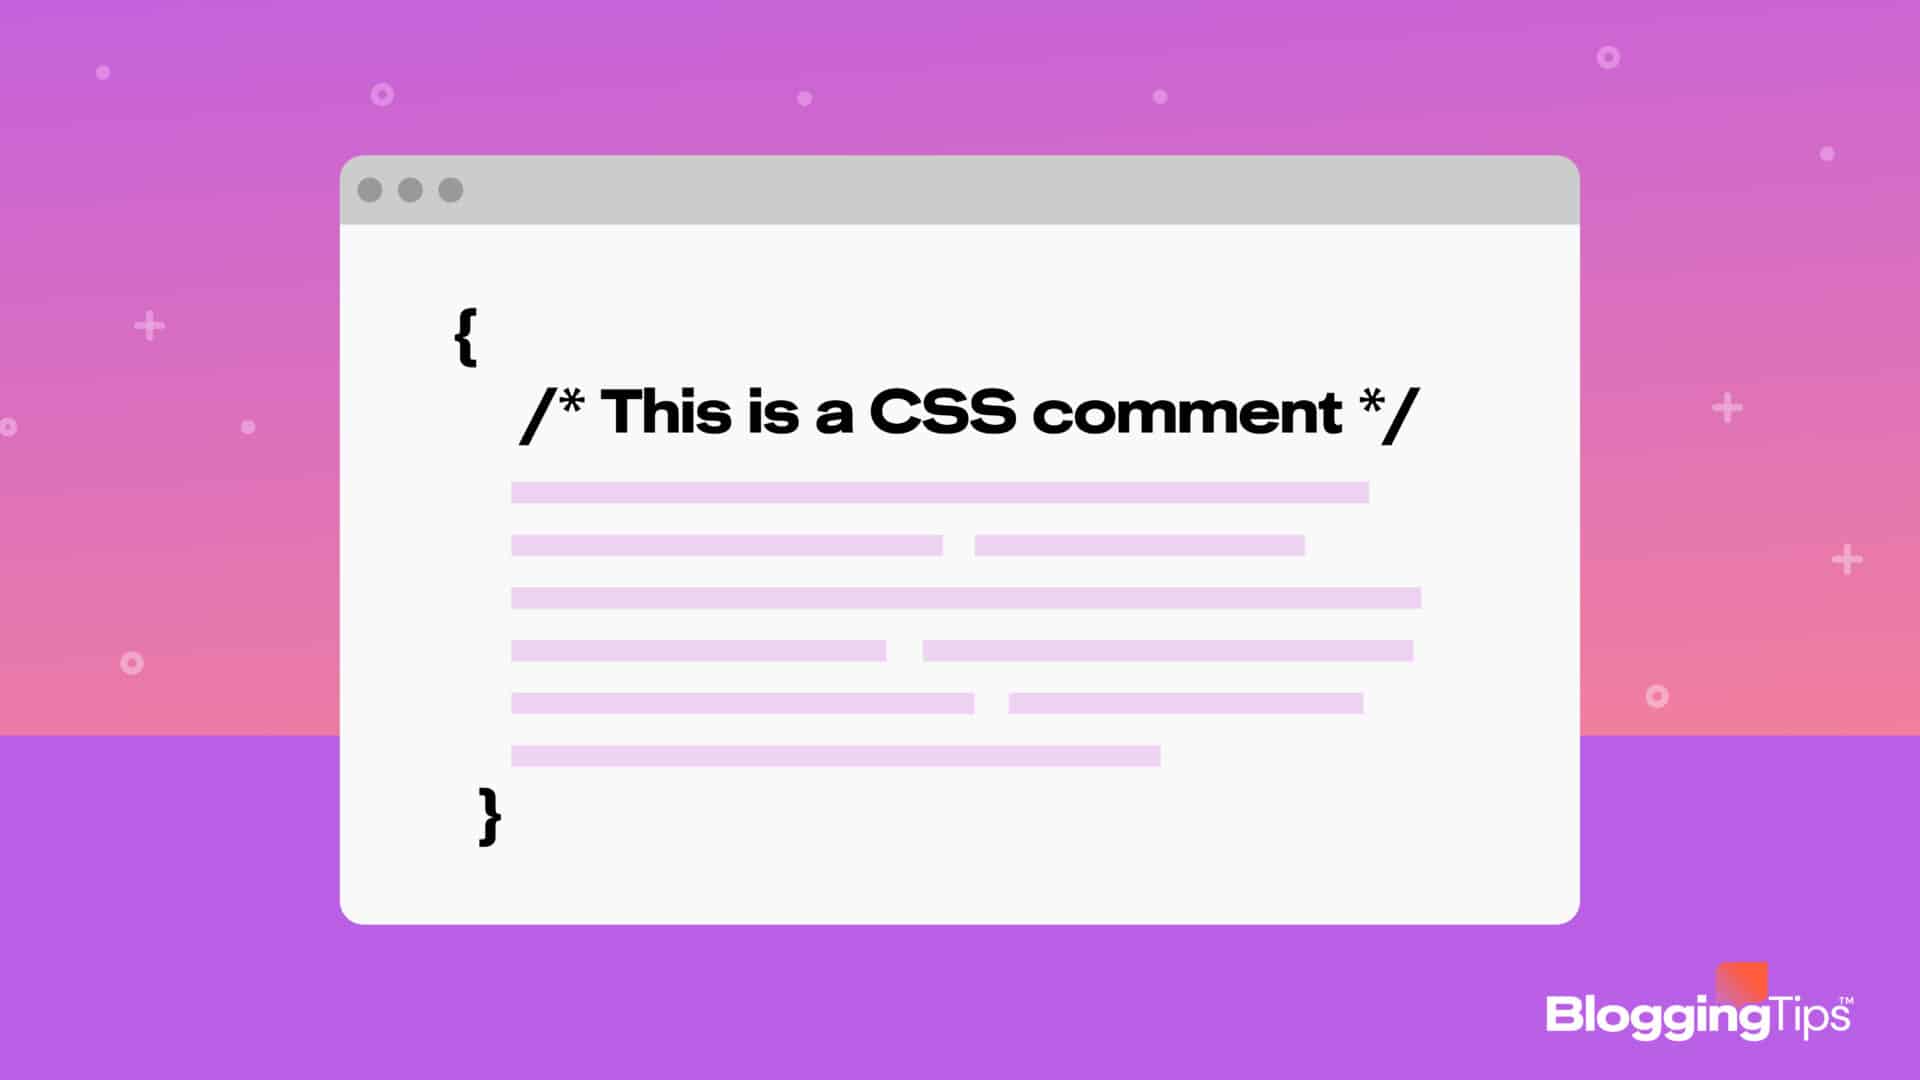 vector graphic showing an illustration of a css comment screen - code on a computer screen